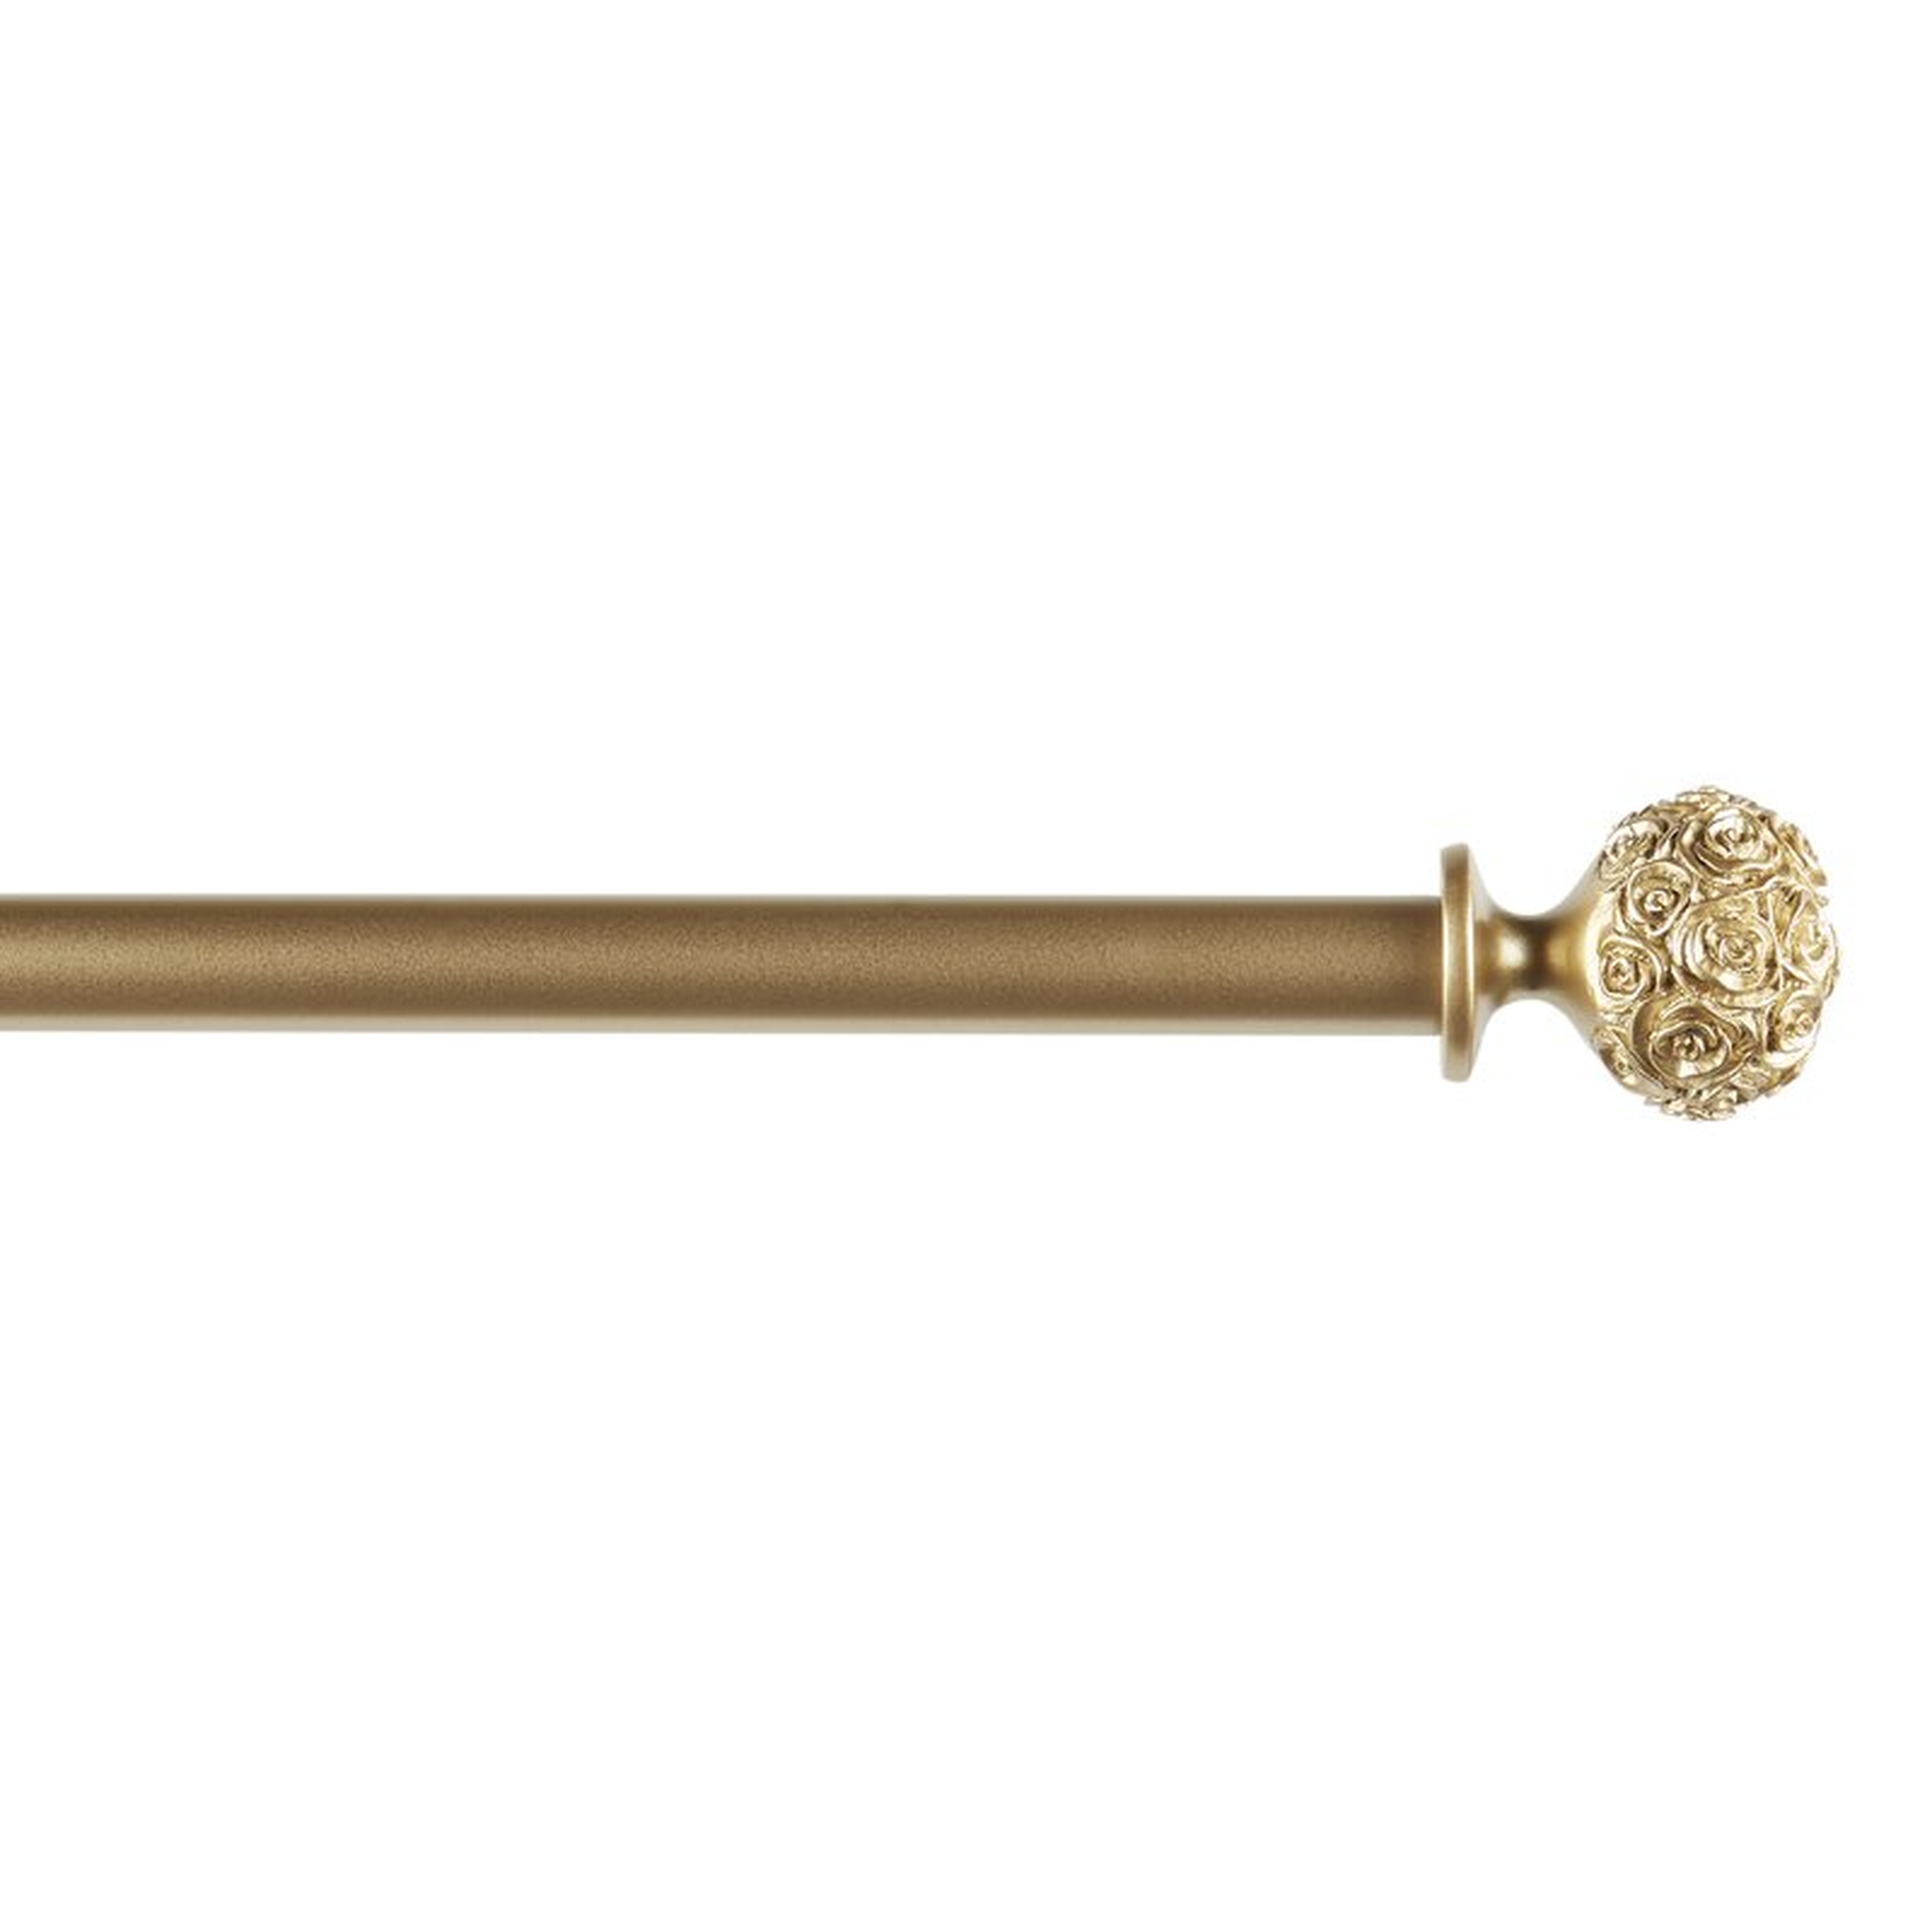 Etheredge Exclusive Home Peony 1" Curtain Rod and Coordinating Finial Set, Adjustable - Wayfair